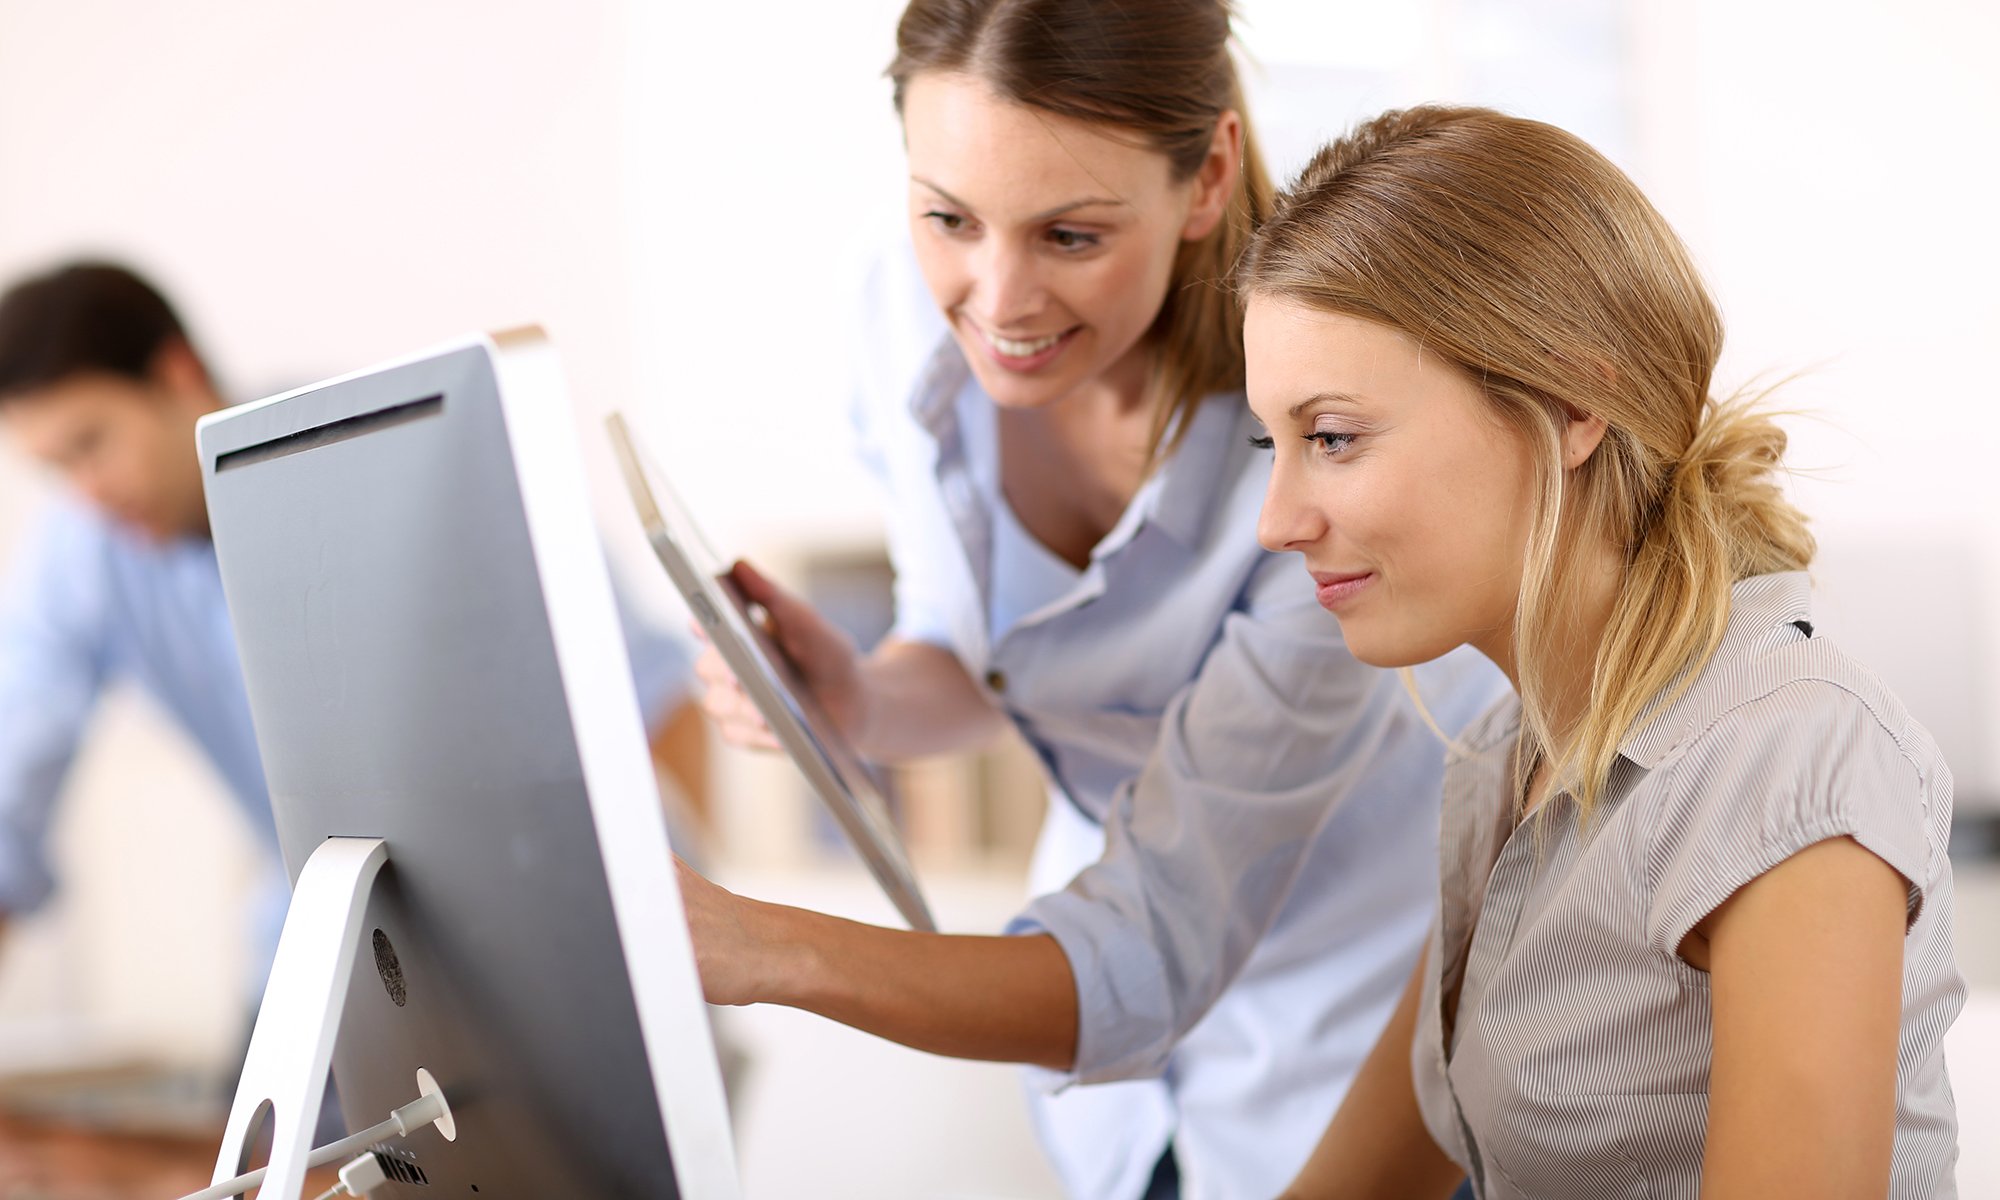 This is a picture of two women looking at a computer to choose a crowdfunding site for their next fundraising project.